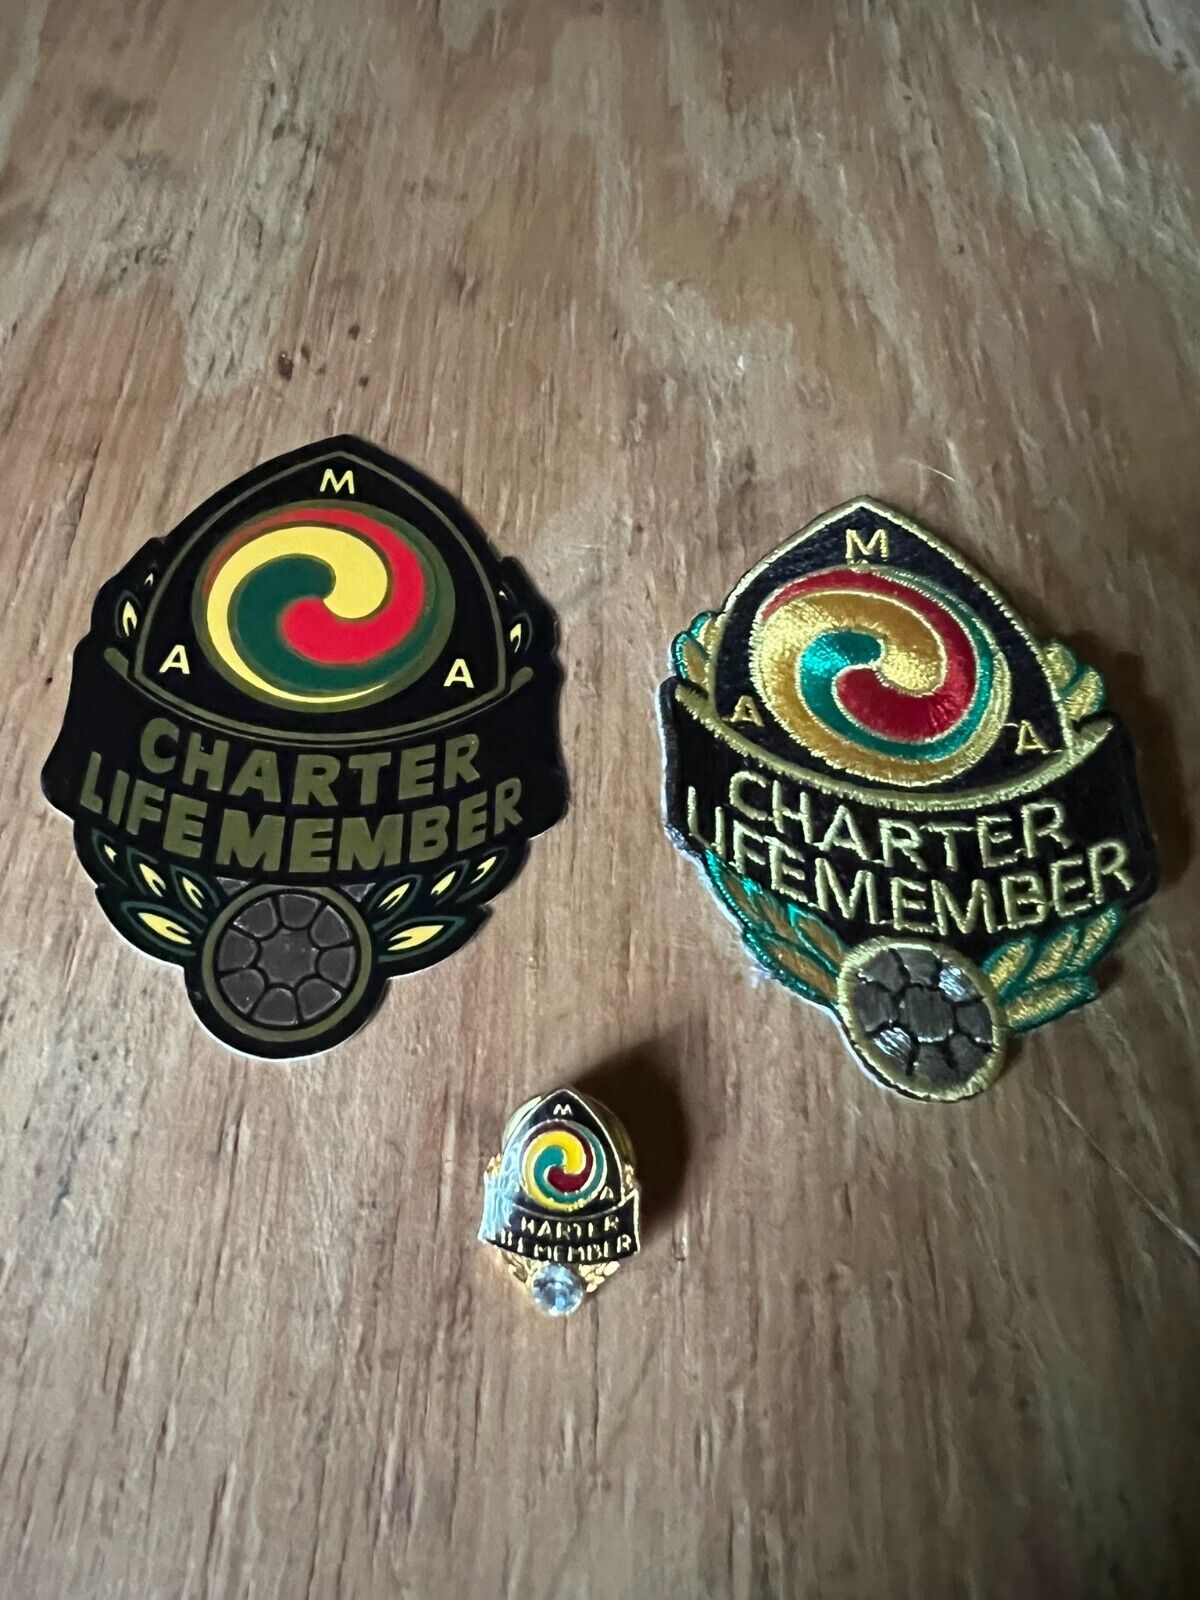 AMA CHARTER LIFE MEMBER PIN, PATCH & DECAL